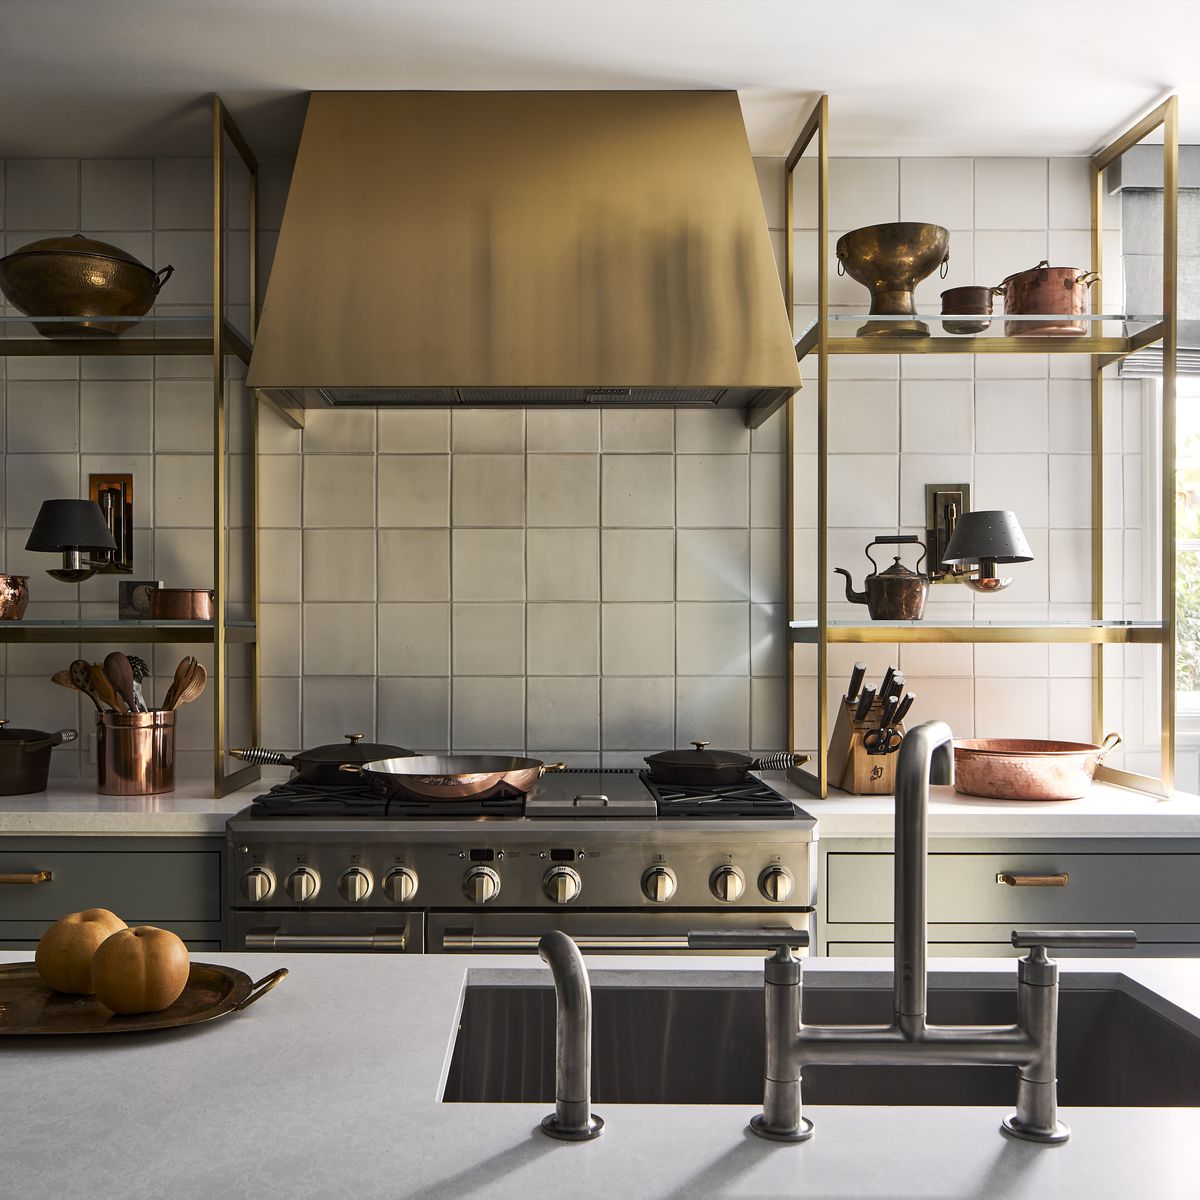 6 Kitchen Trends We’re Leaving Behind in 2023